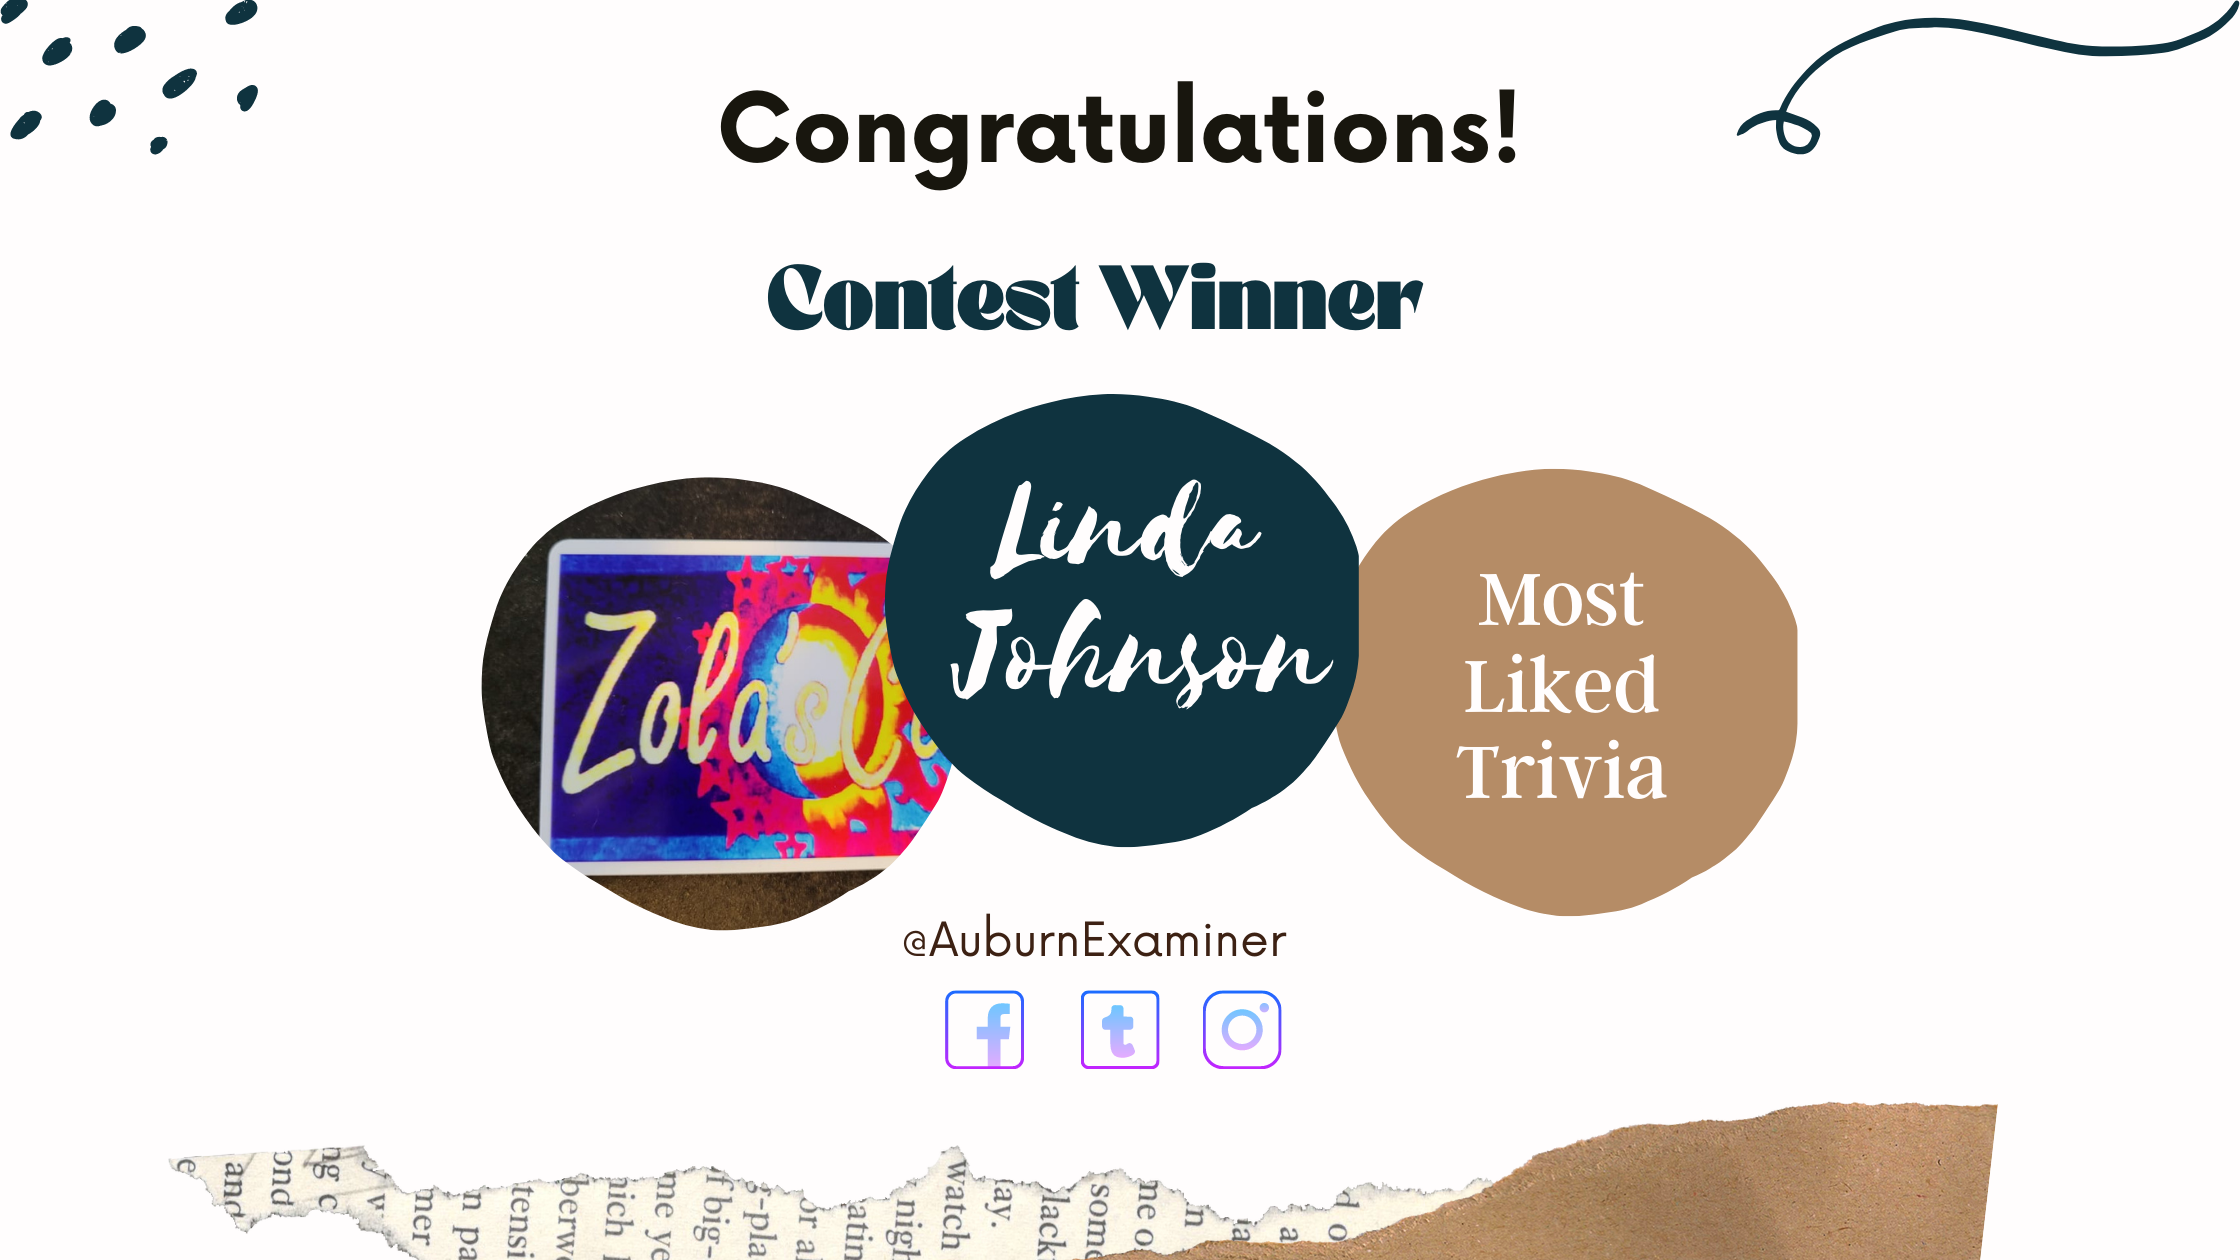 a graphic congratulating Linda Johnson for winning the most liked trivia contest